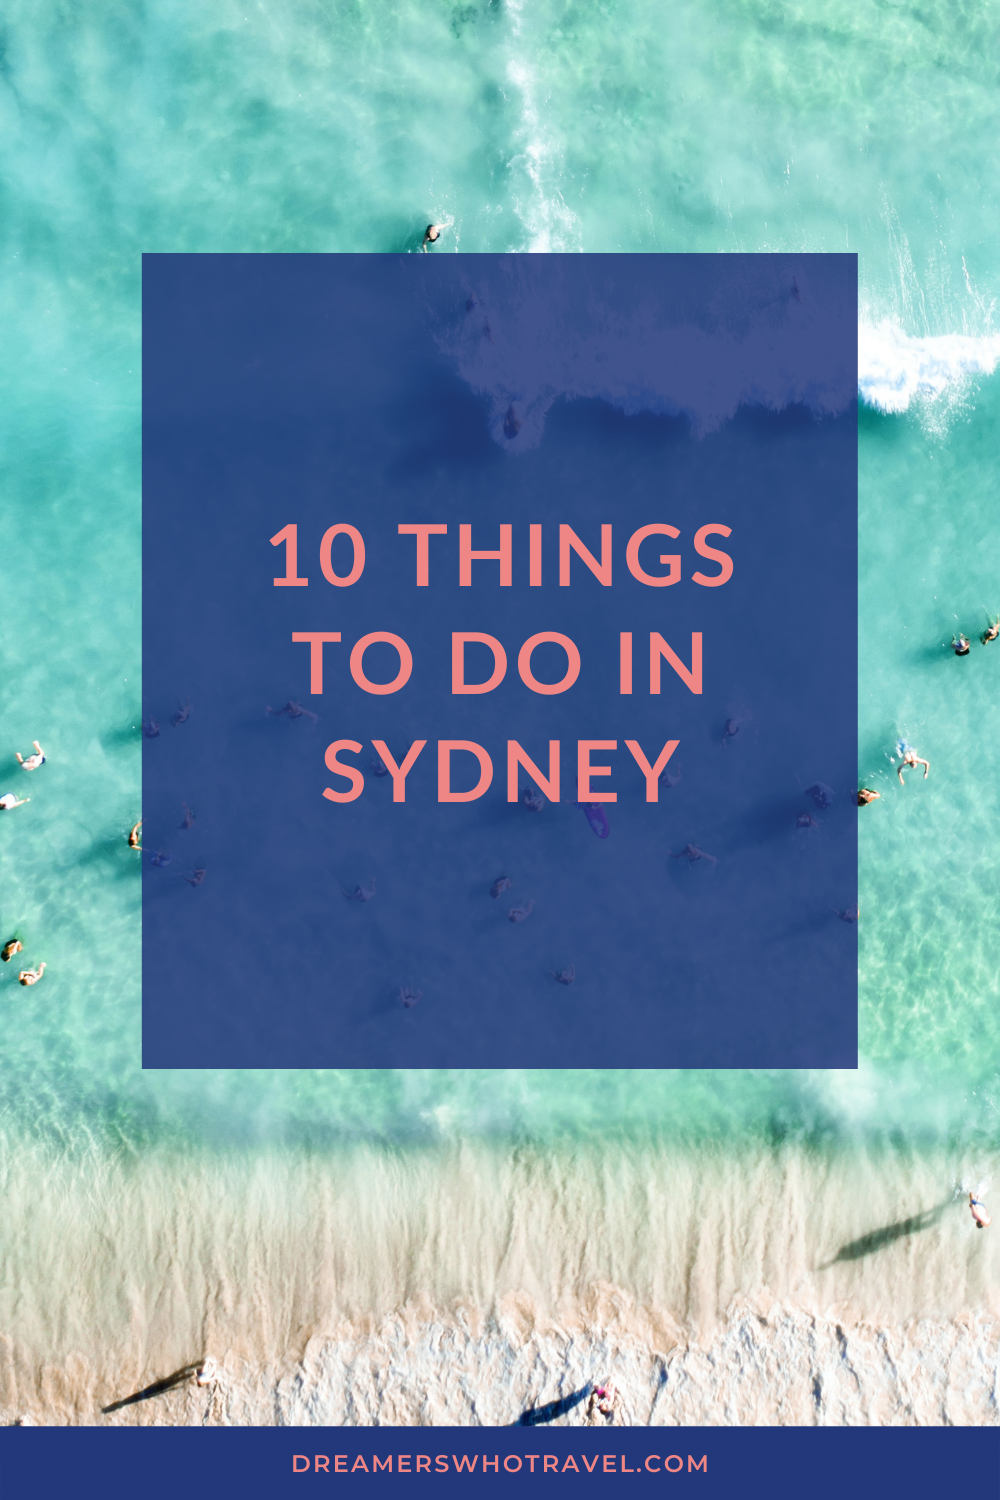 10 THINGS TO DO IN SYDNEY